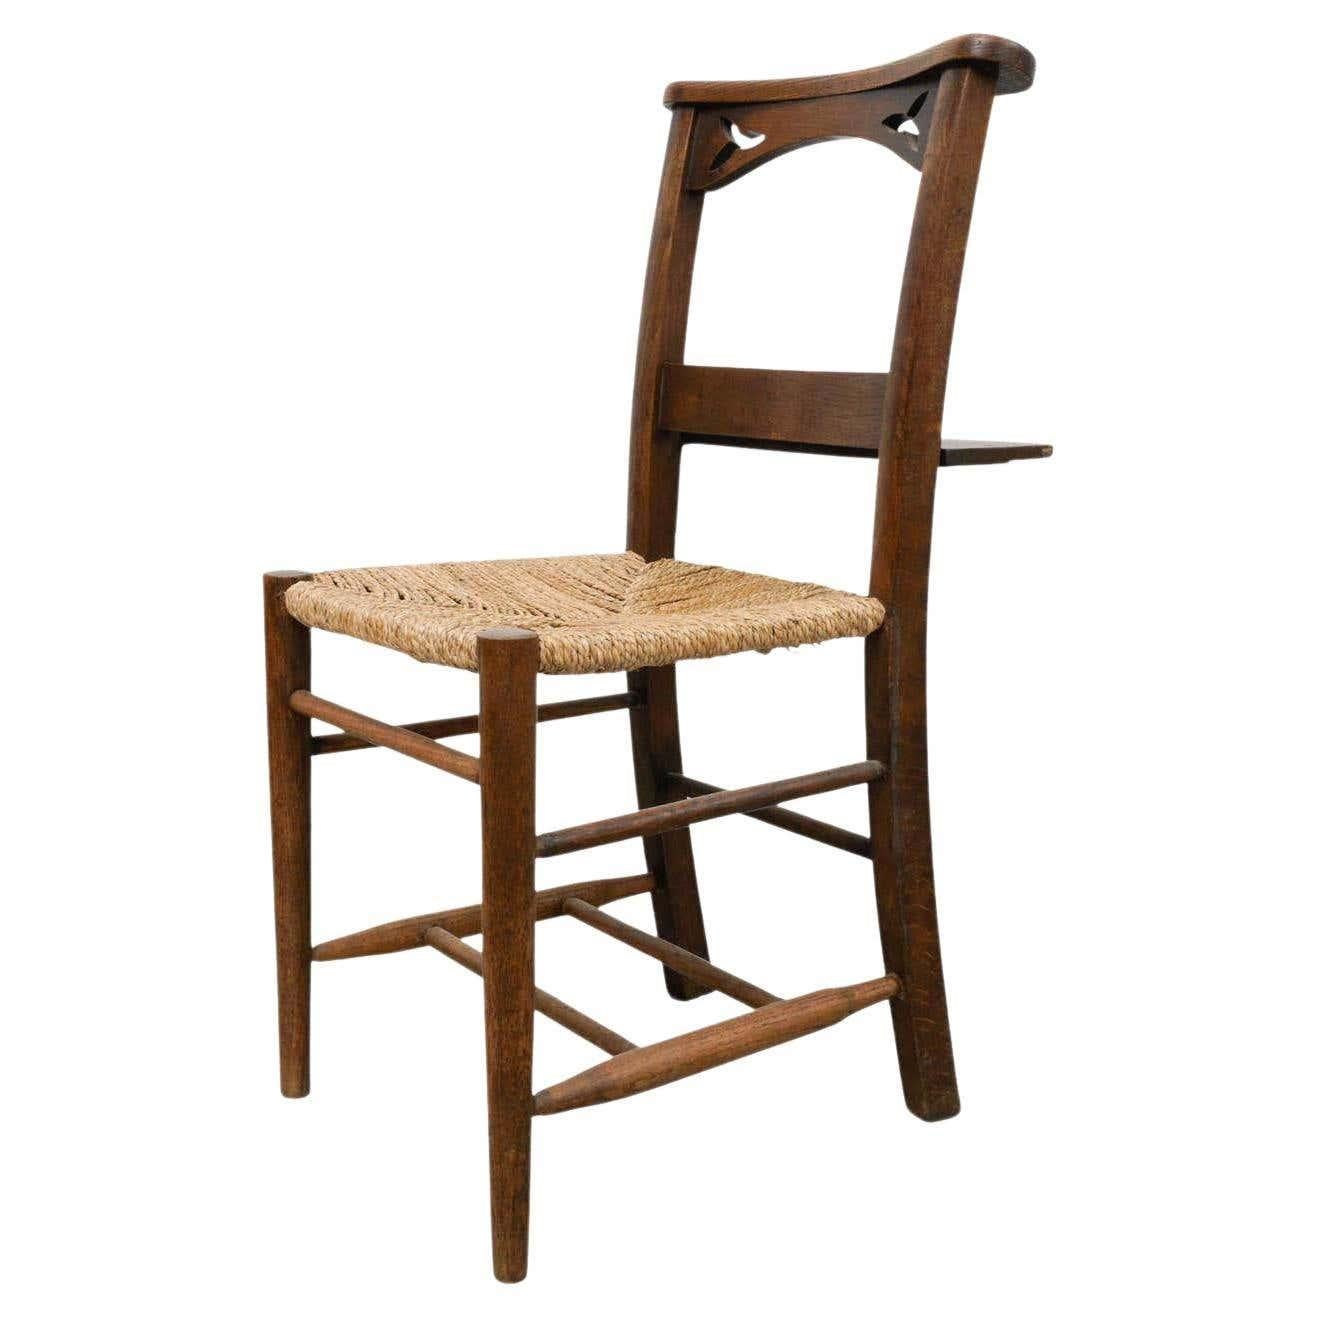 Early 20th Century Traditional Wood and Rattan Church Chair For Sale